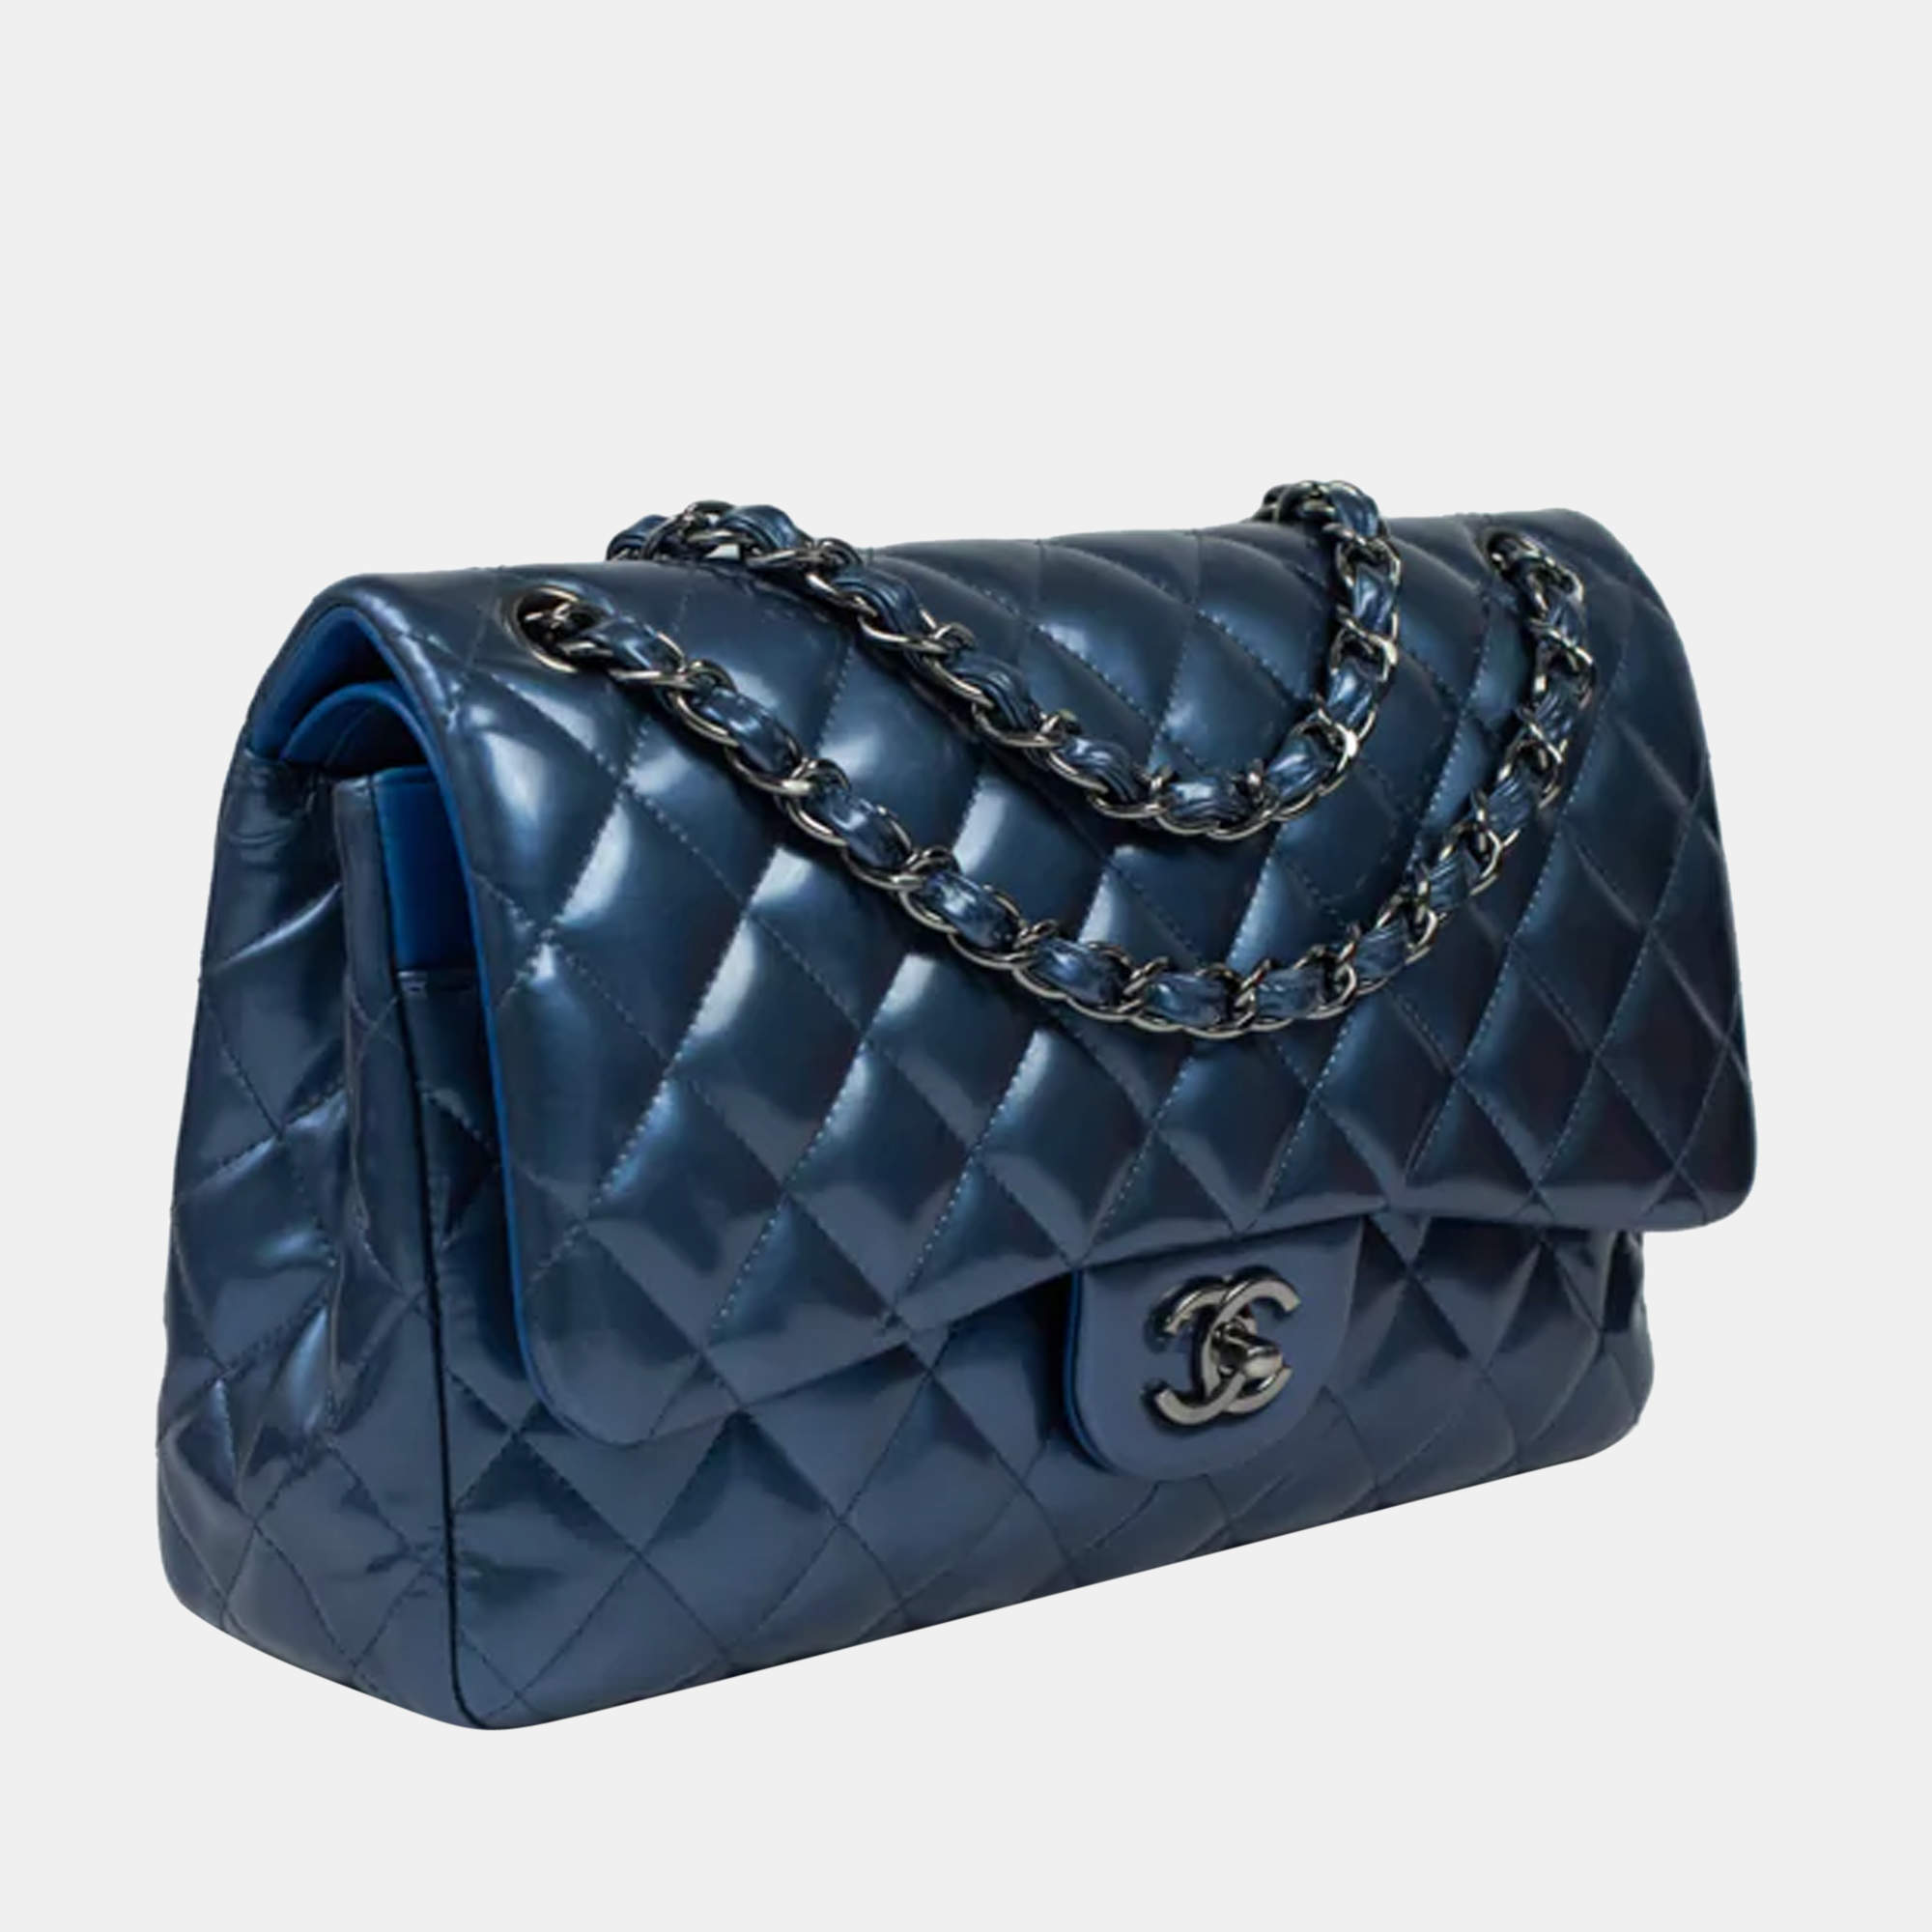 Chanel Blue Quilted Caviar Leather Jumbo Classic Flap Bag Chanel